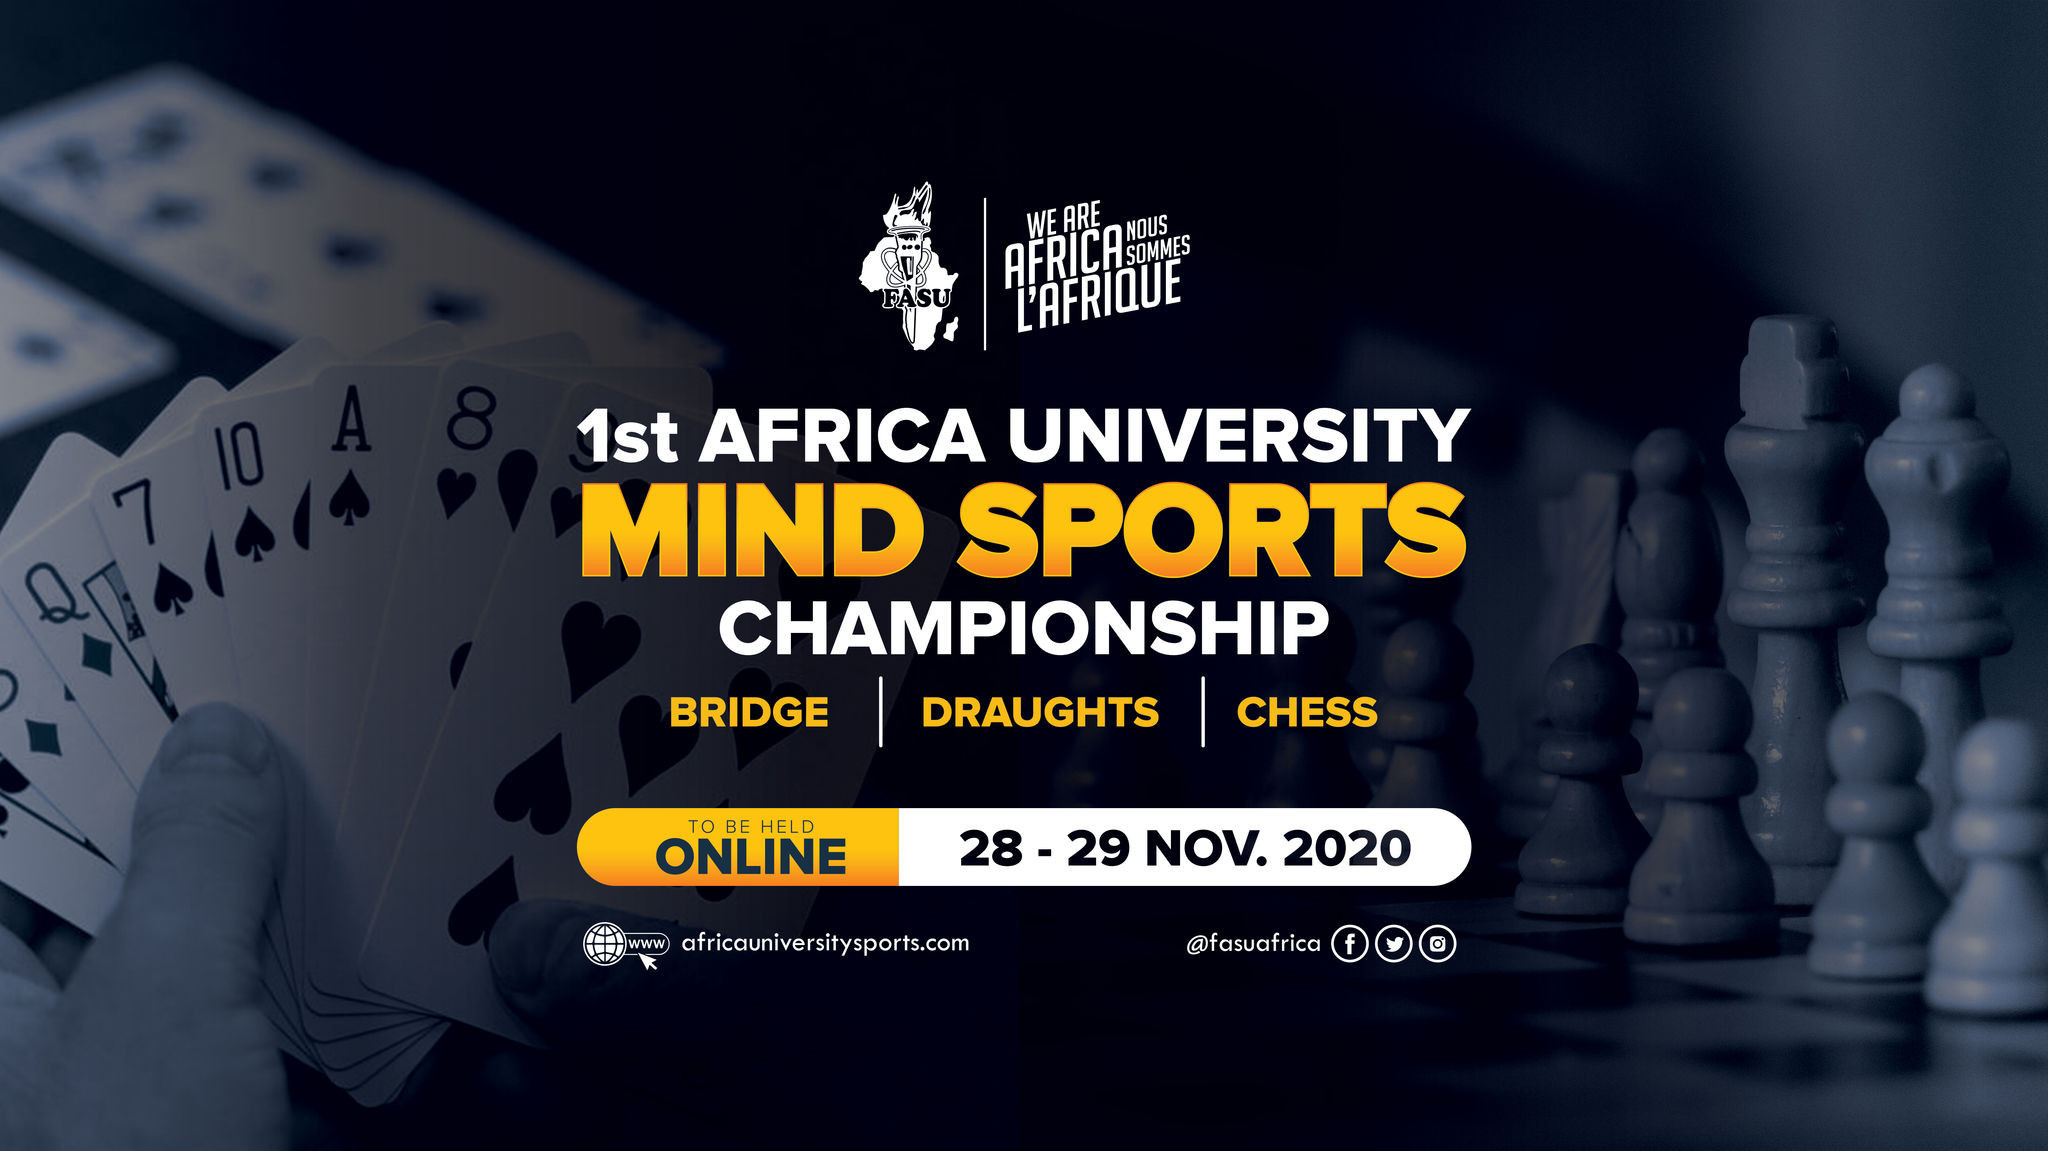 The Federation of African University Sports held its first Africa University Mind Sports Championships in late November ©FISU